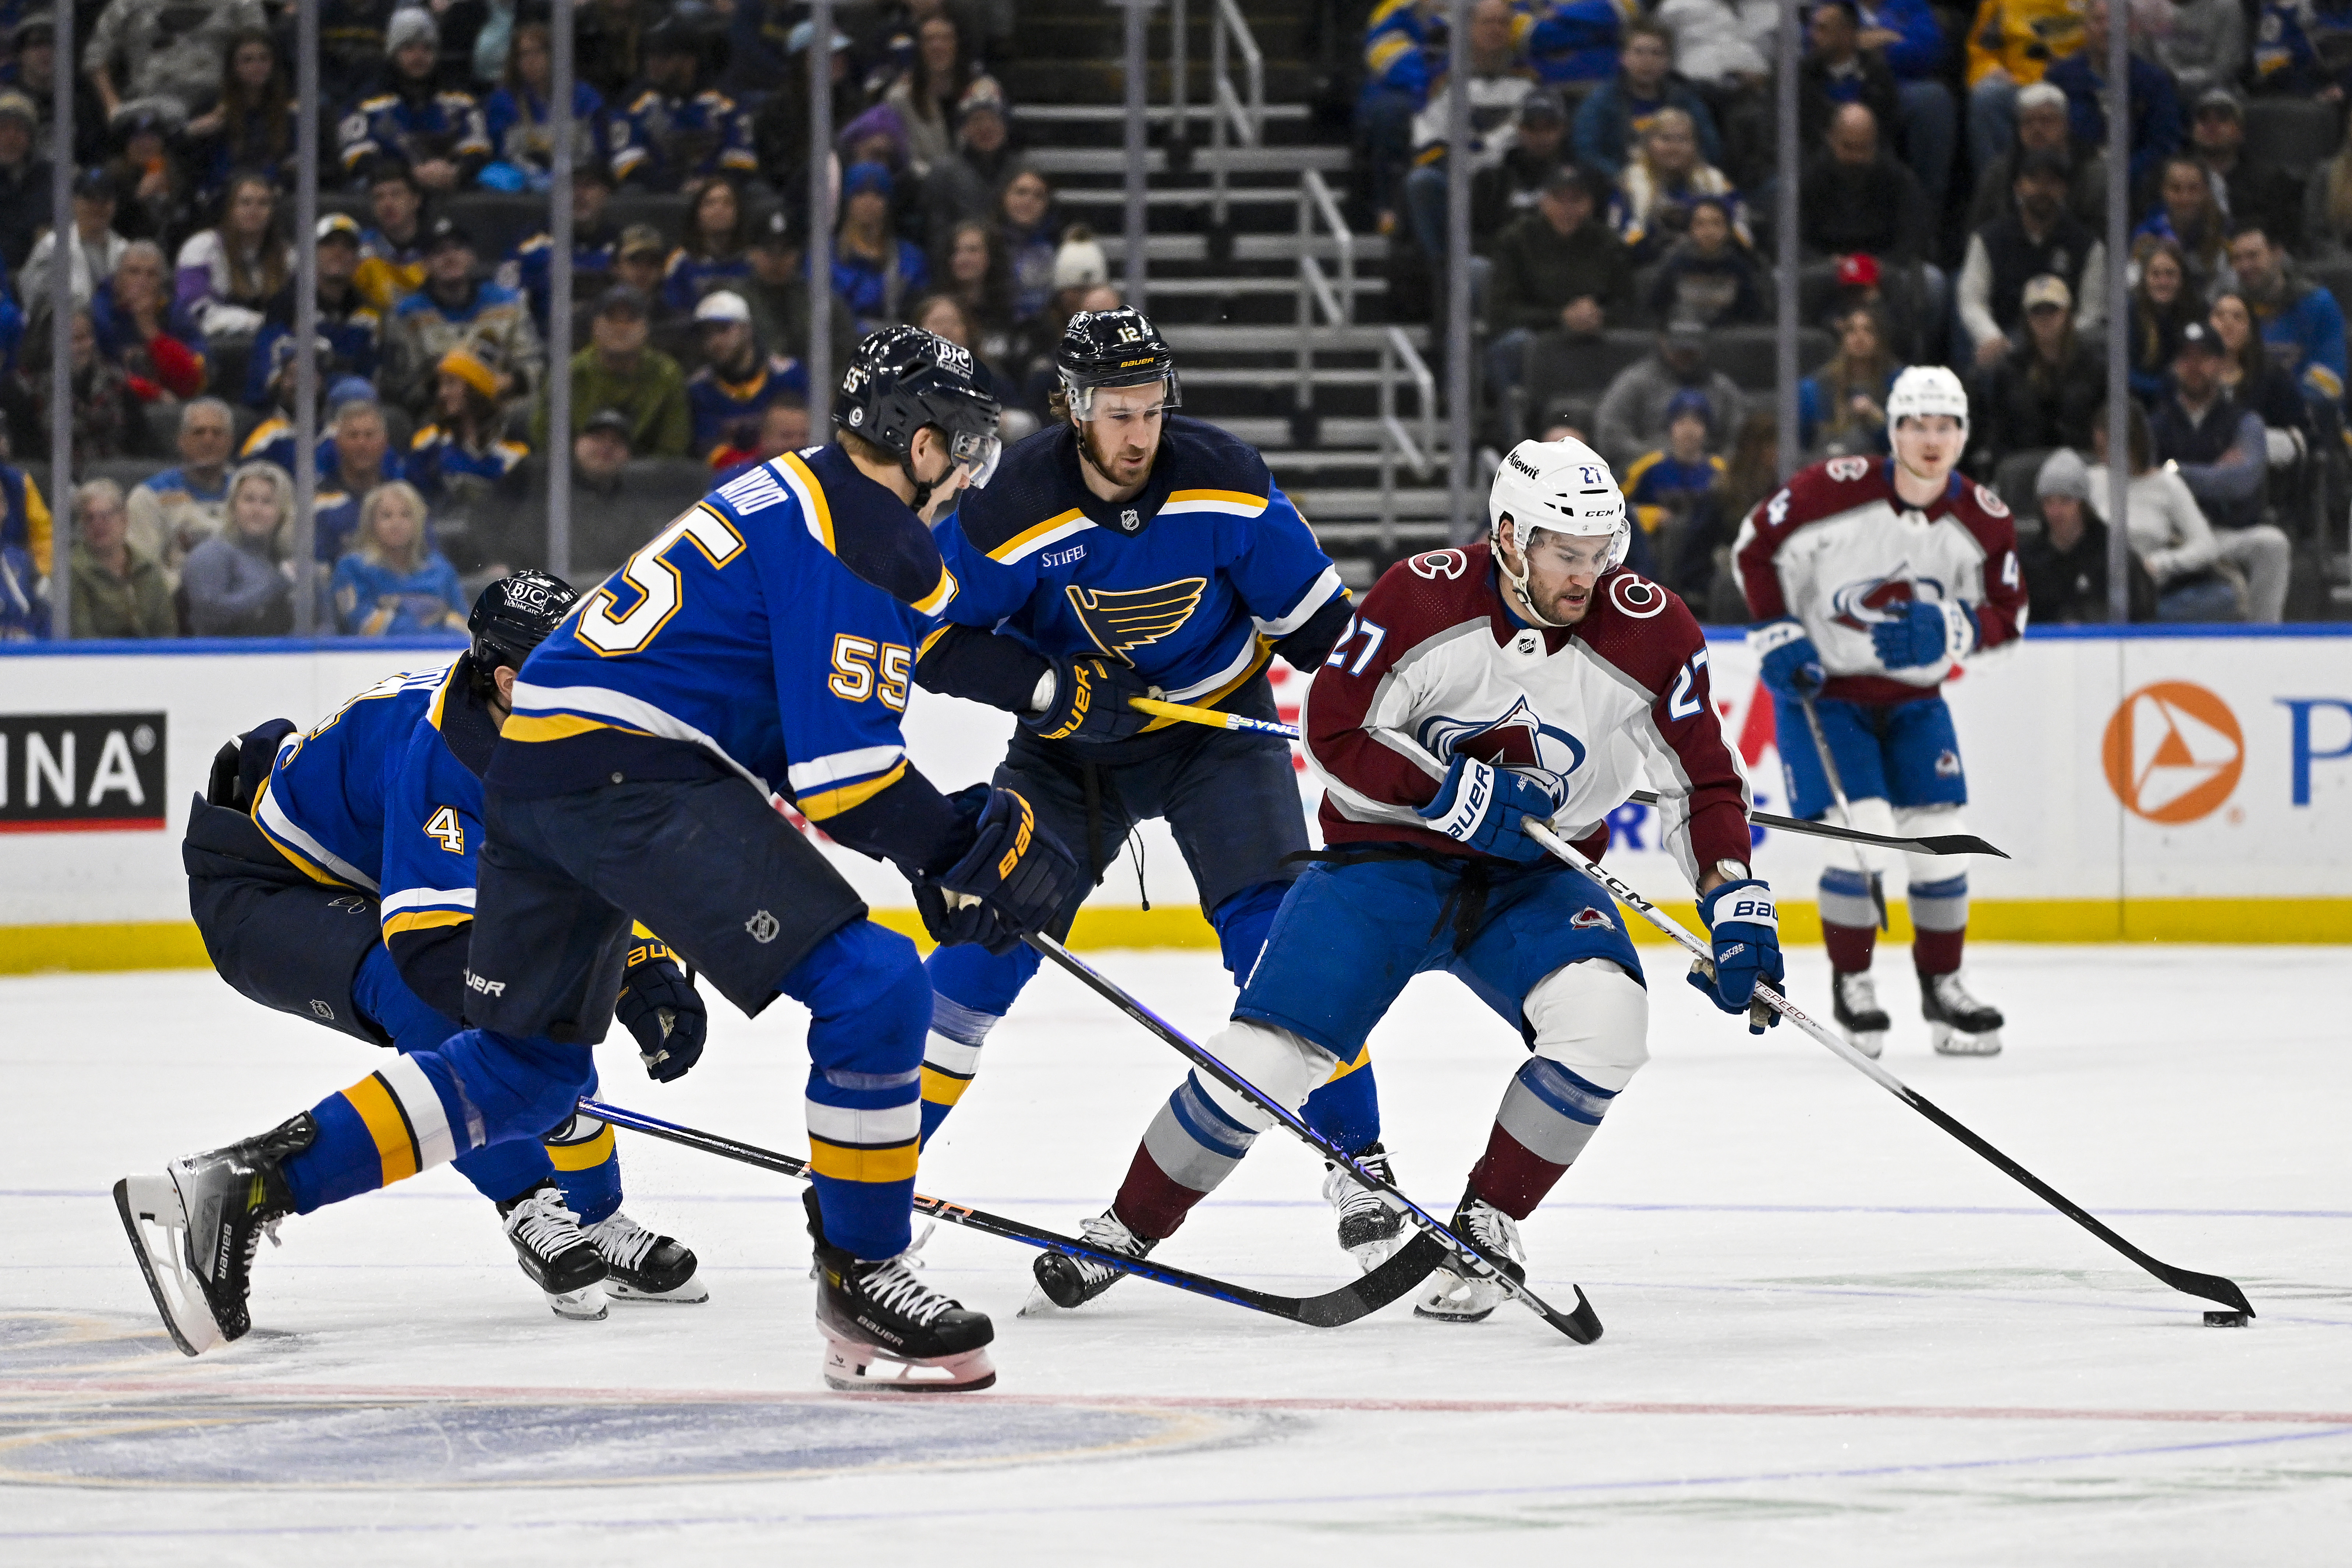 Avalanche nip Blues, end winless skid in road games